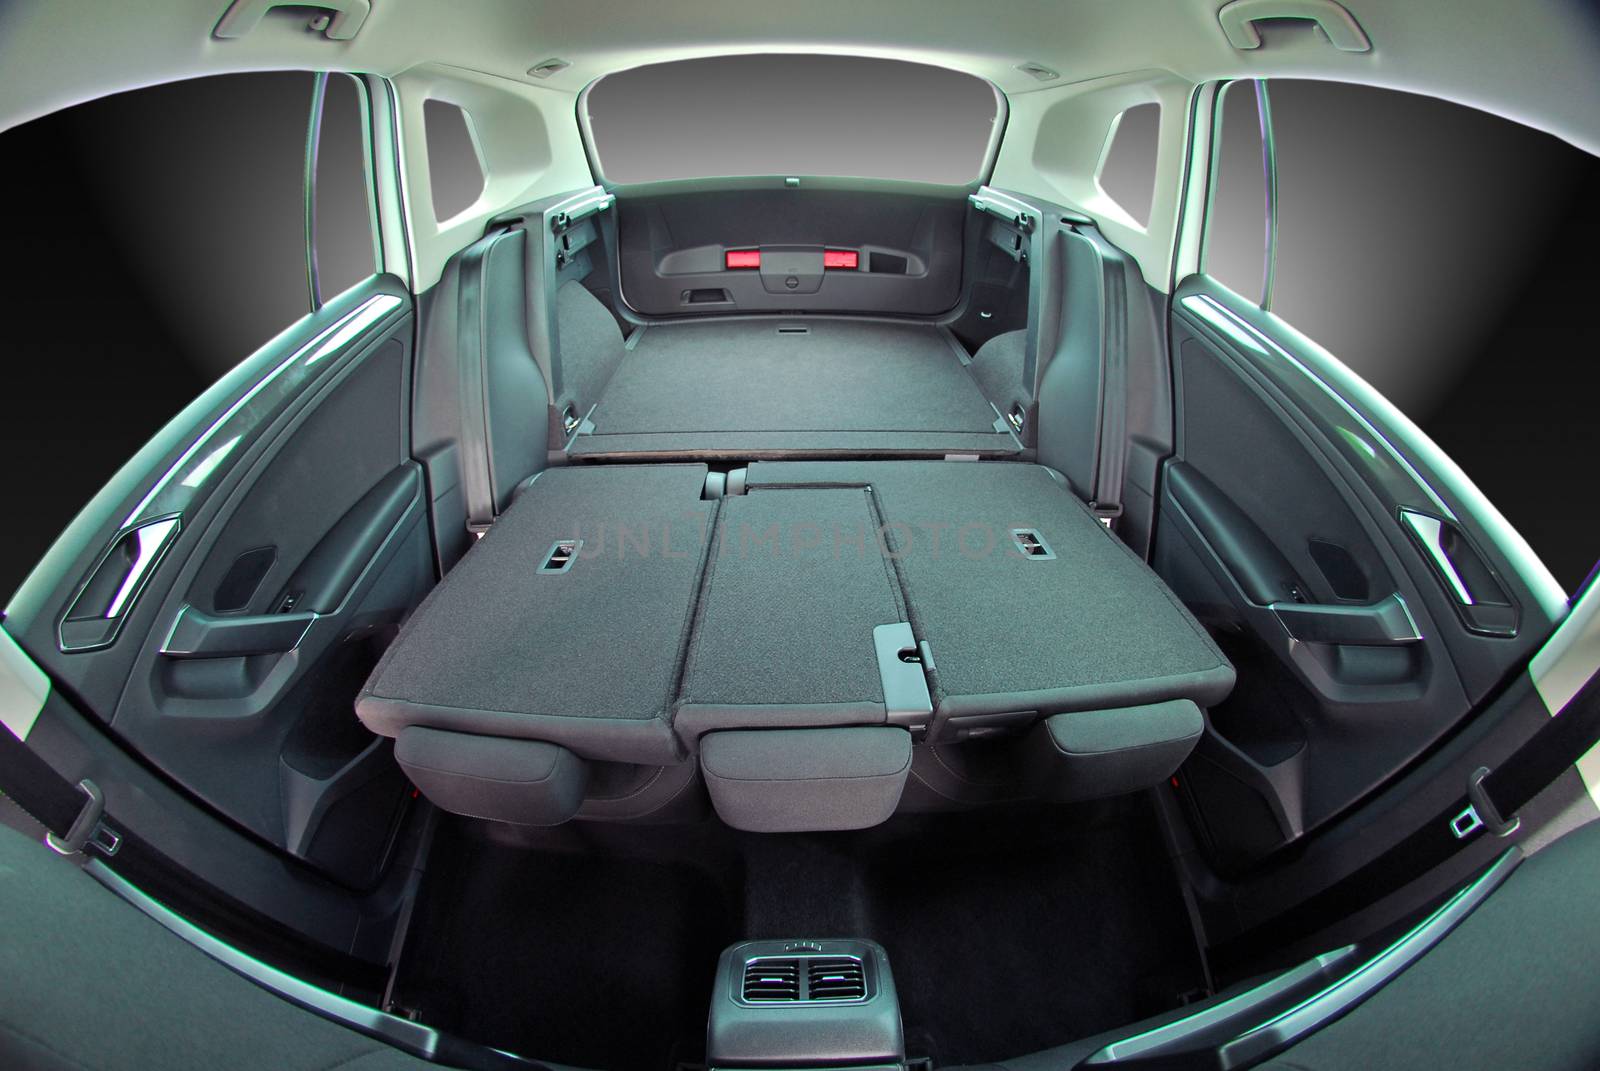 passenger car trunk with rear seats folded